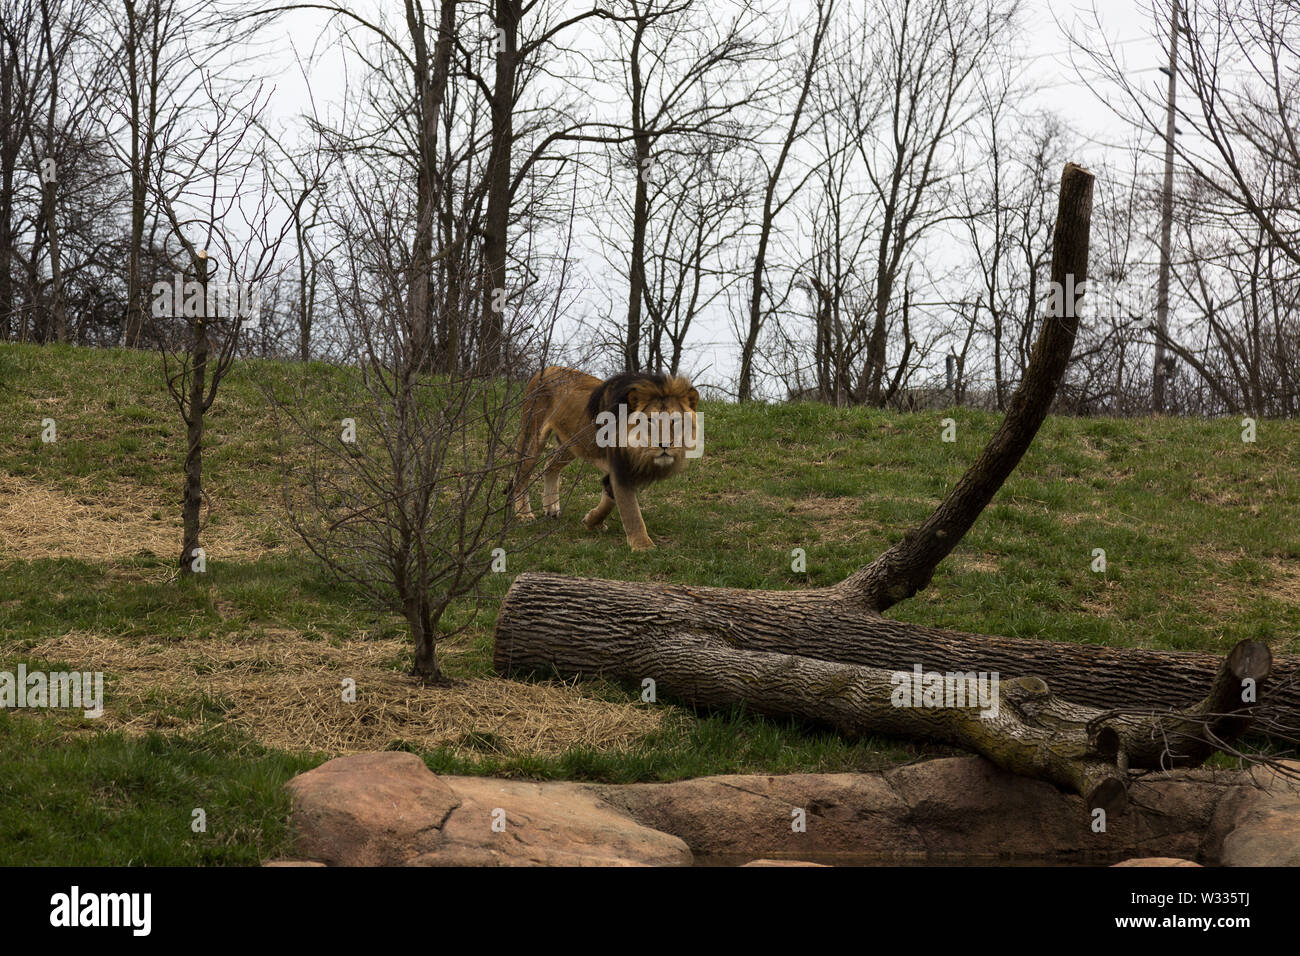 Bahati, the male African Lion at the Fort Wayne Children's Zoo, roams his enclosure in Fort Wayne, Indiana, USA. Stock Photo